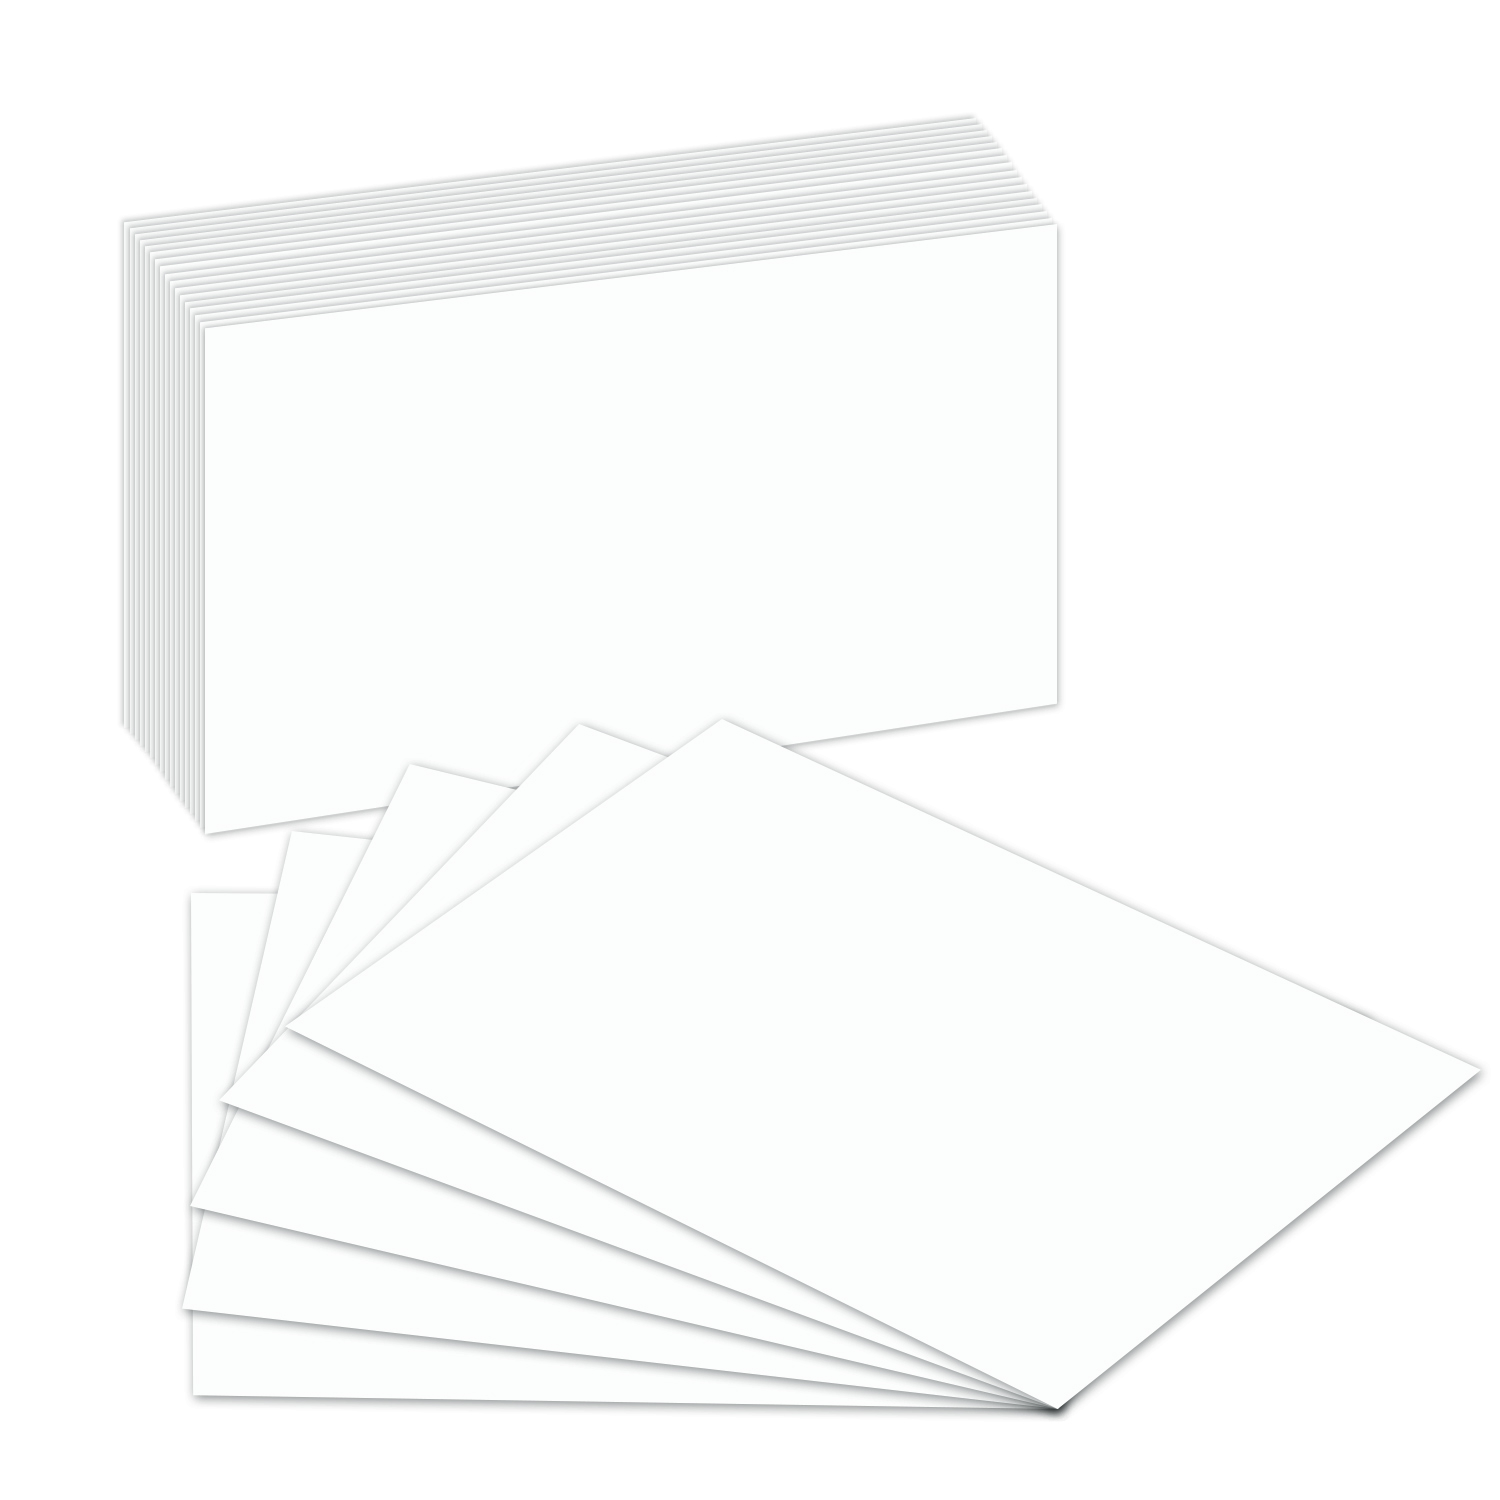 8.5 x 14 White Card Stock | Heavyweight 100lb Cover (270gsm) Cardstock  Paper – Smooth Finish | For Arts and Crafts, Brochures, Restaurant Menus